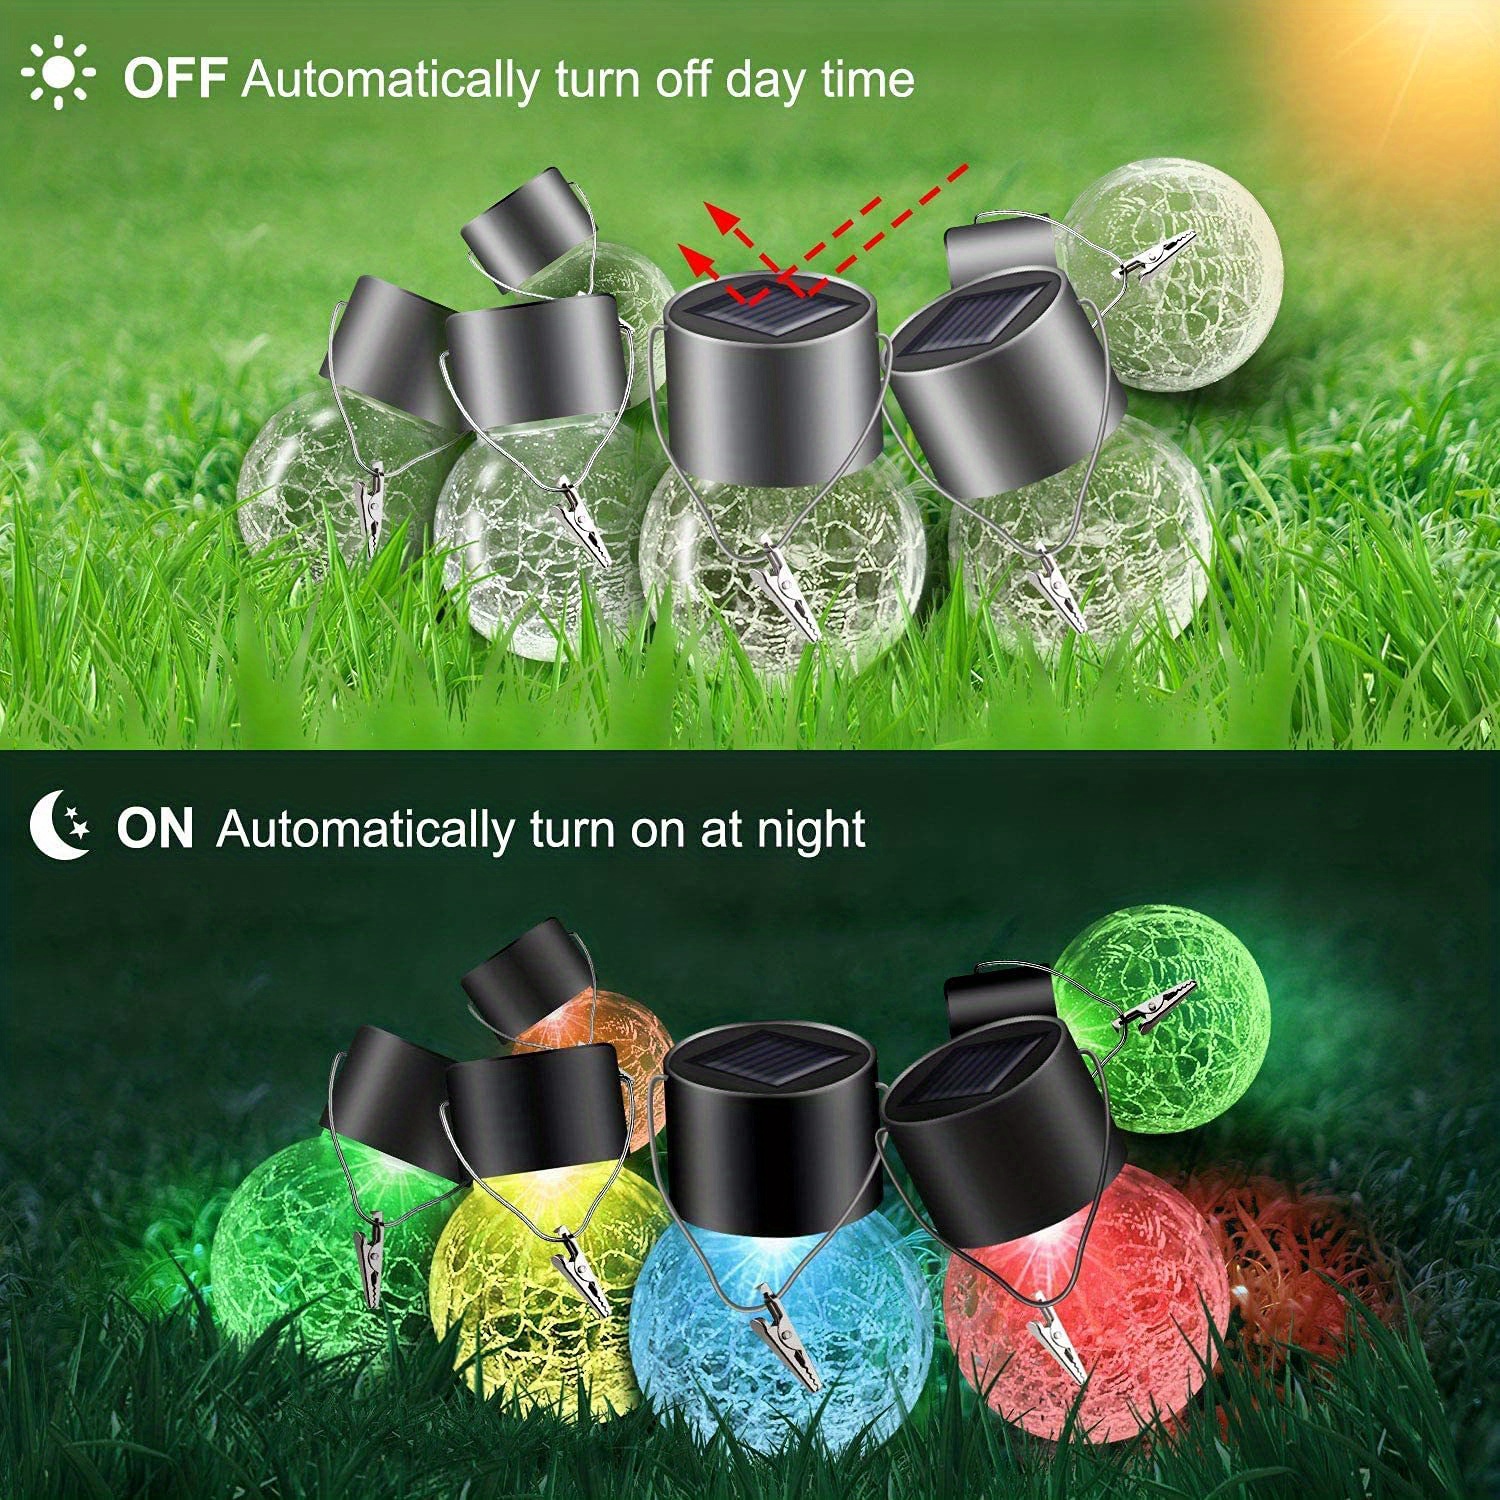 brighten your garden with 12 packs of decorative hanging solar lights waterproof multicolor warmwhite options details 2